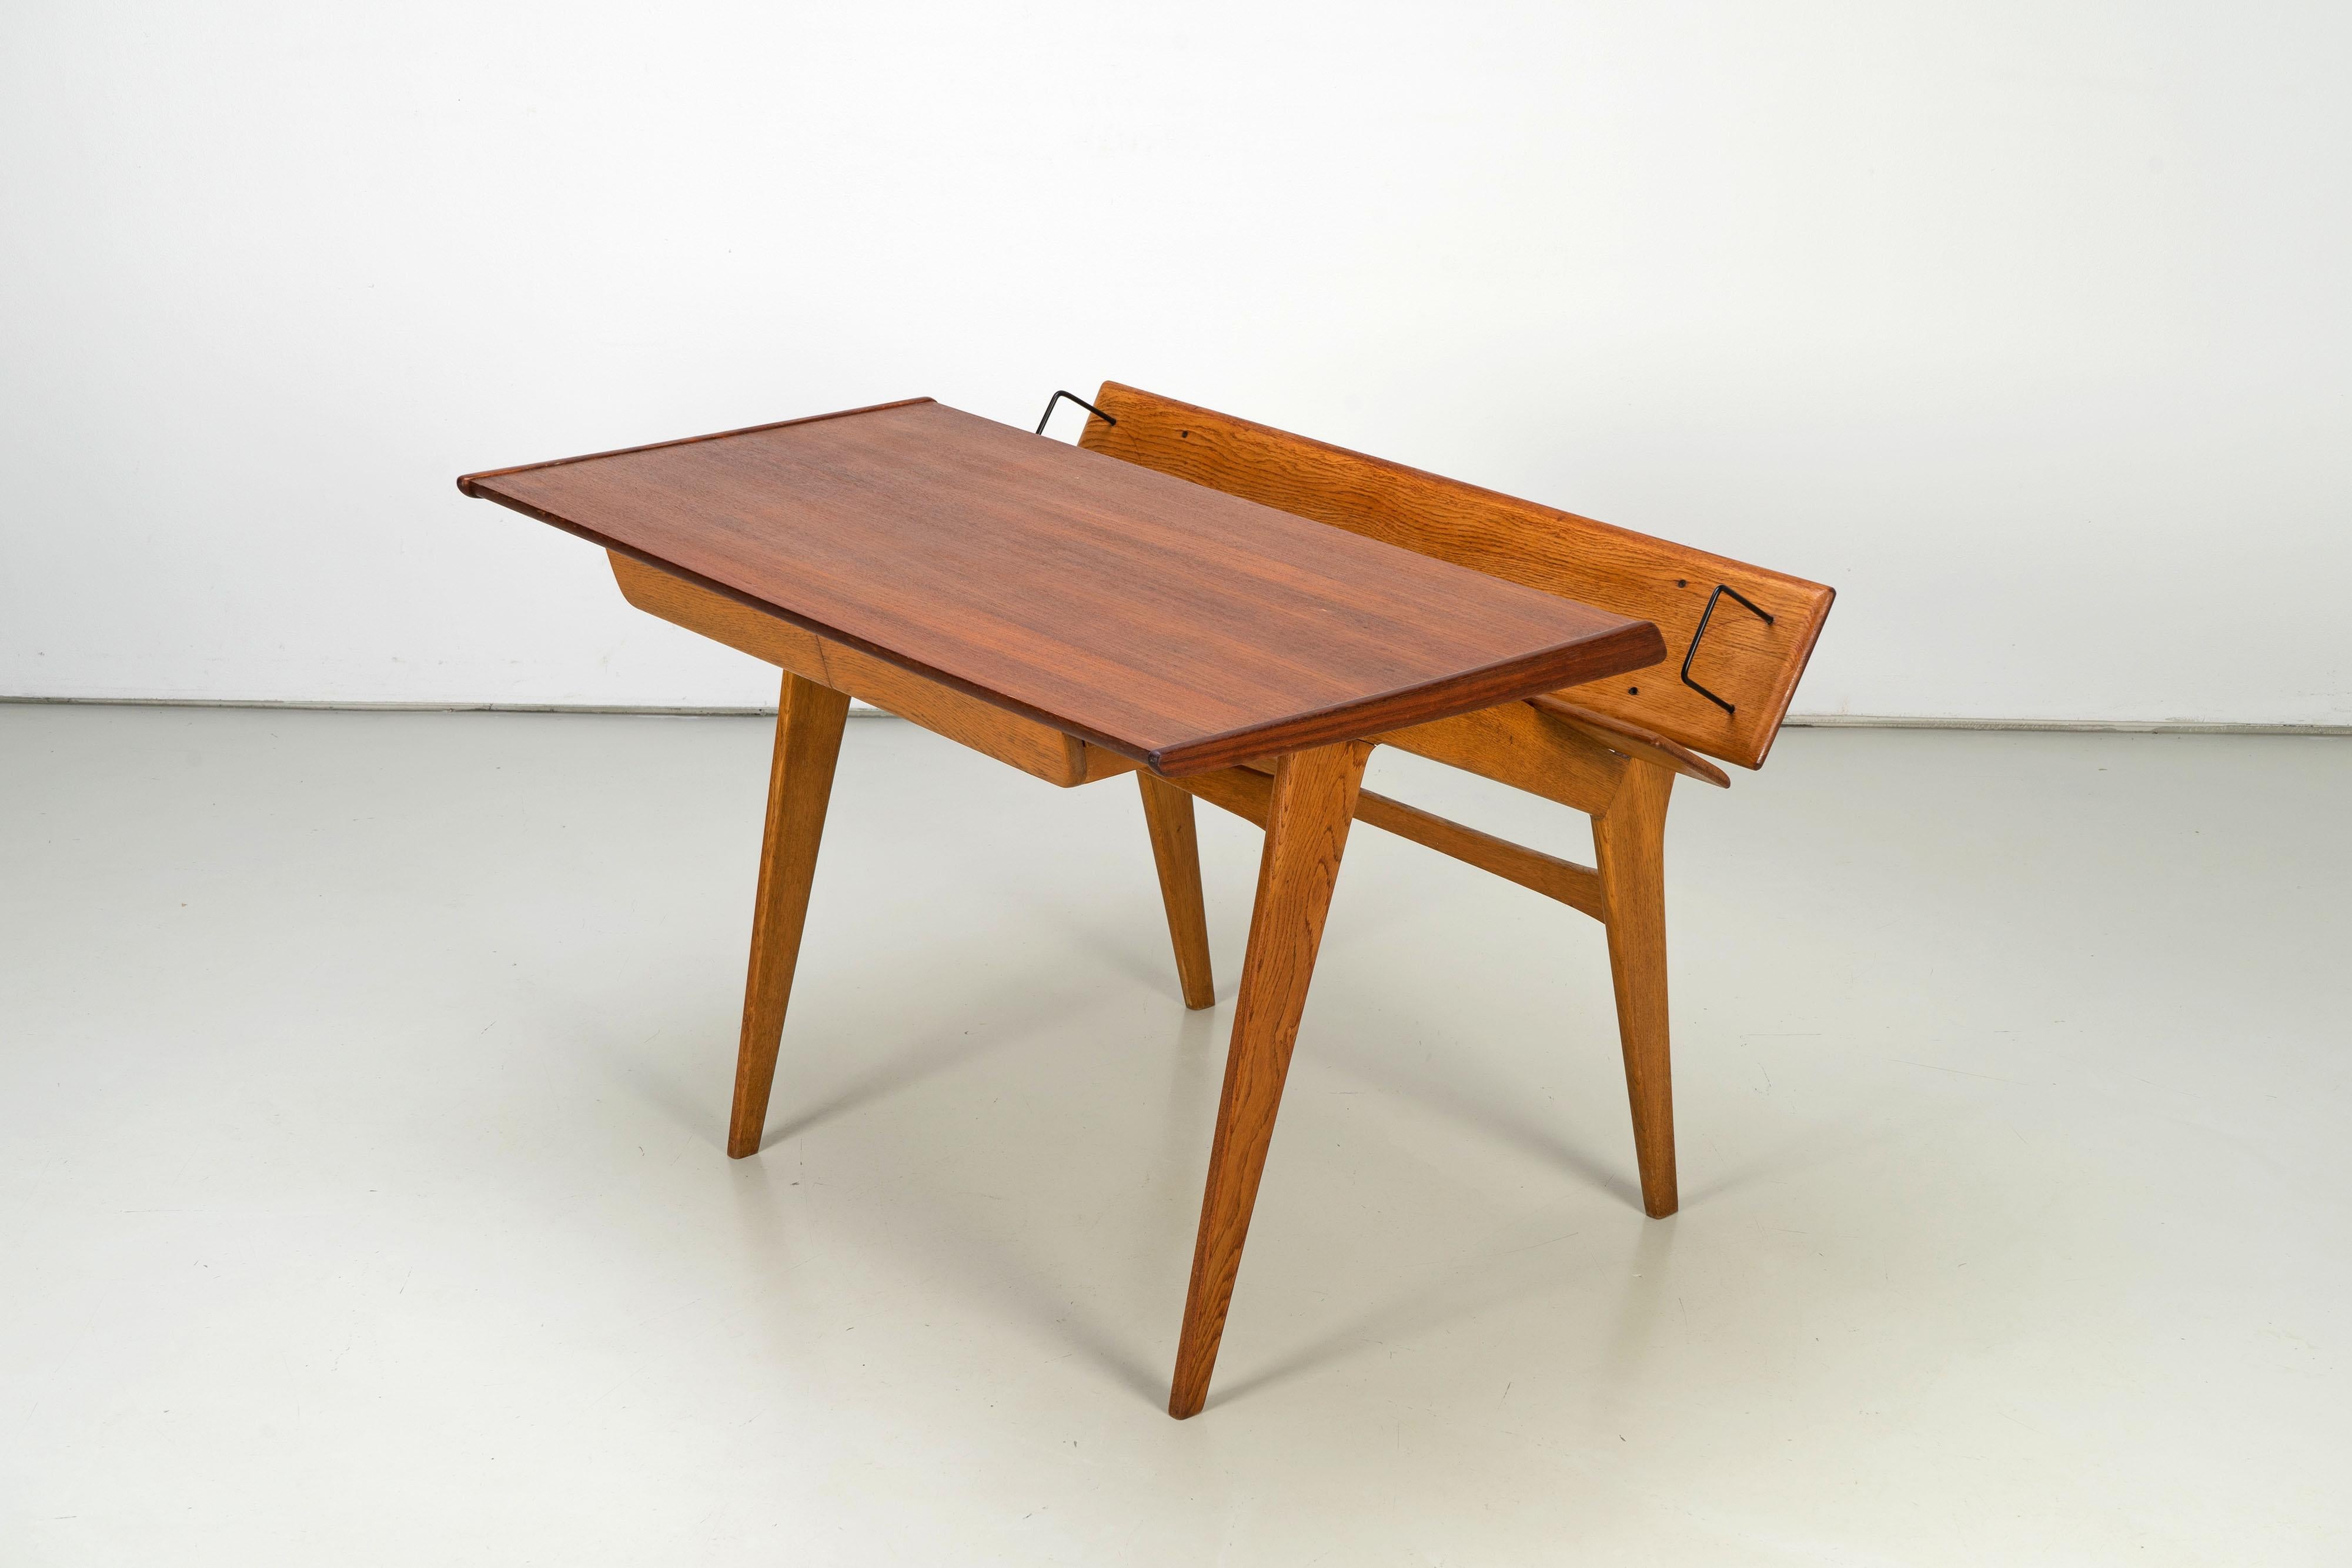 A very rare writing desk made from teak and oakwood from the 1950s. The desk is excellently manufactured and features an extraordinare design. A book rack with built-in bookends floats behind the tabletop.